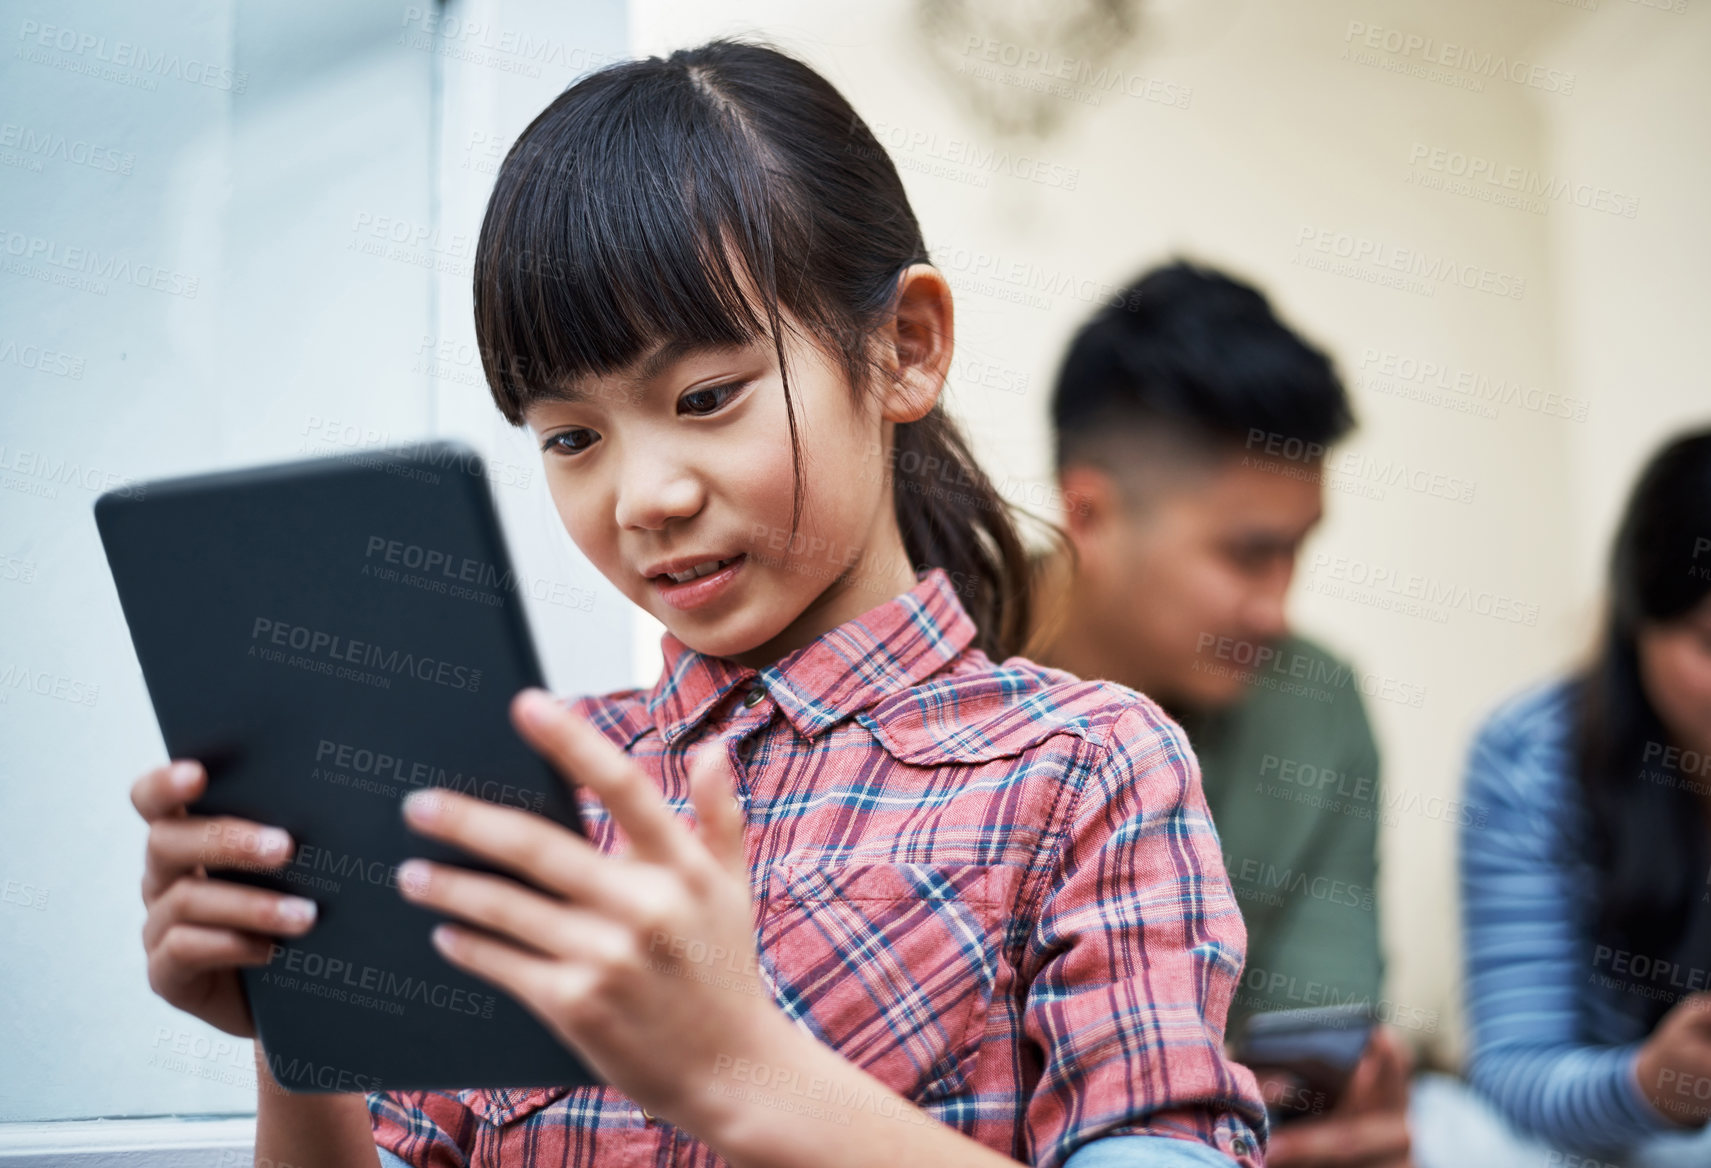 Buy stock photo Shot of a little girl using a digital tablet at home